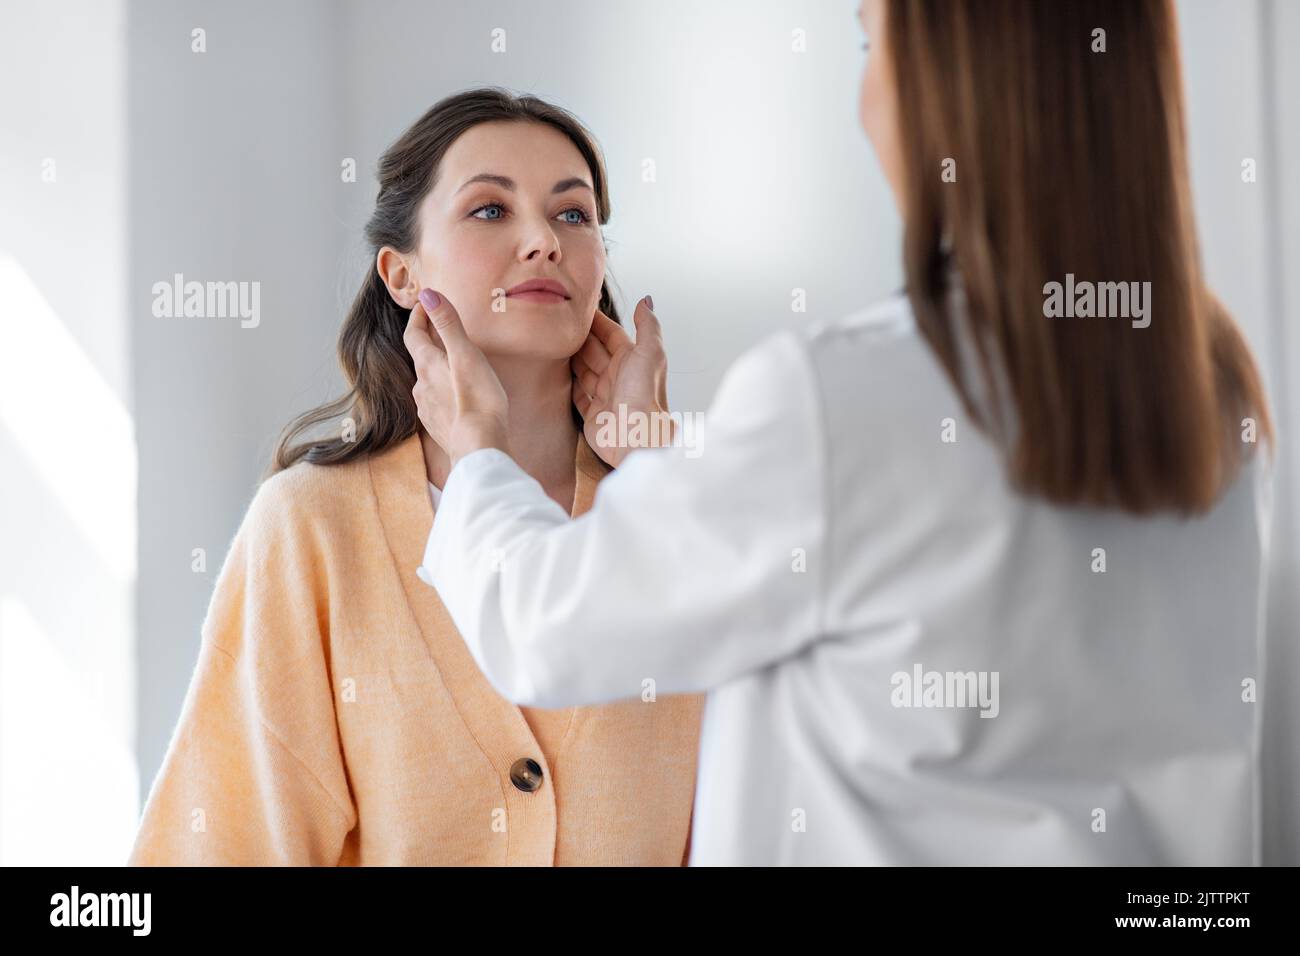 doctor checking lymph nodes of woman at hospital Stock Photo